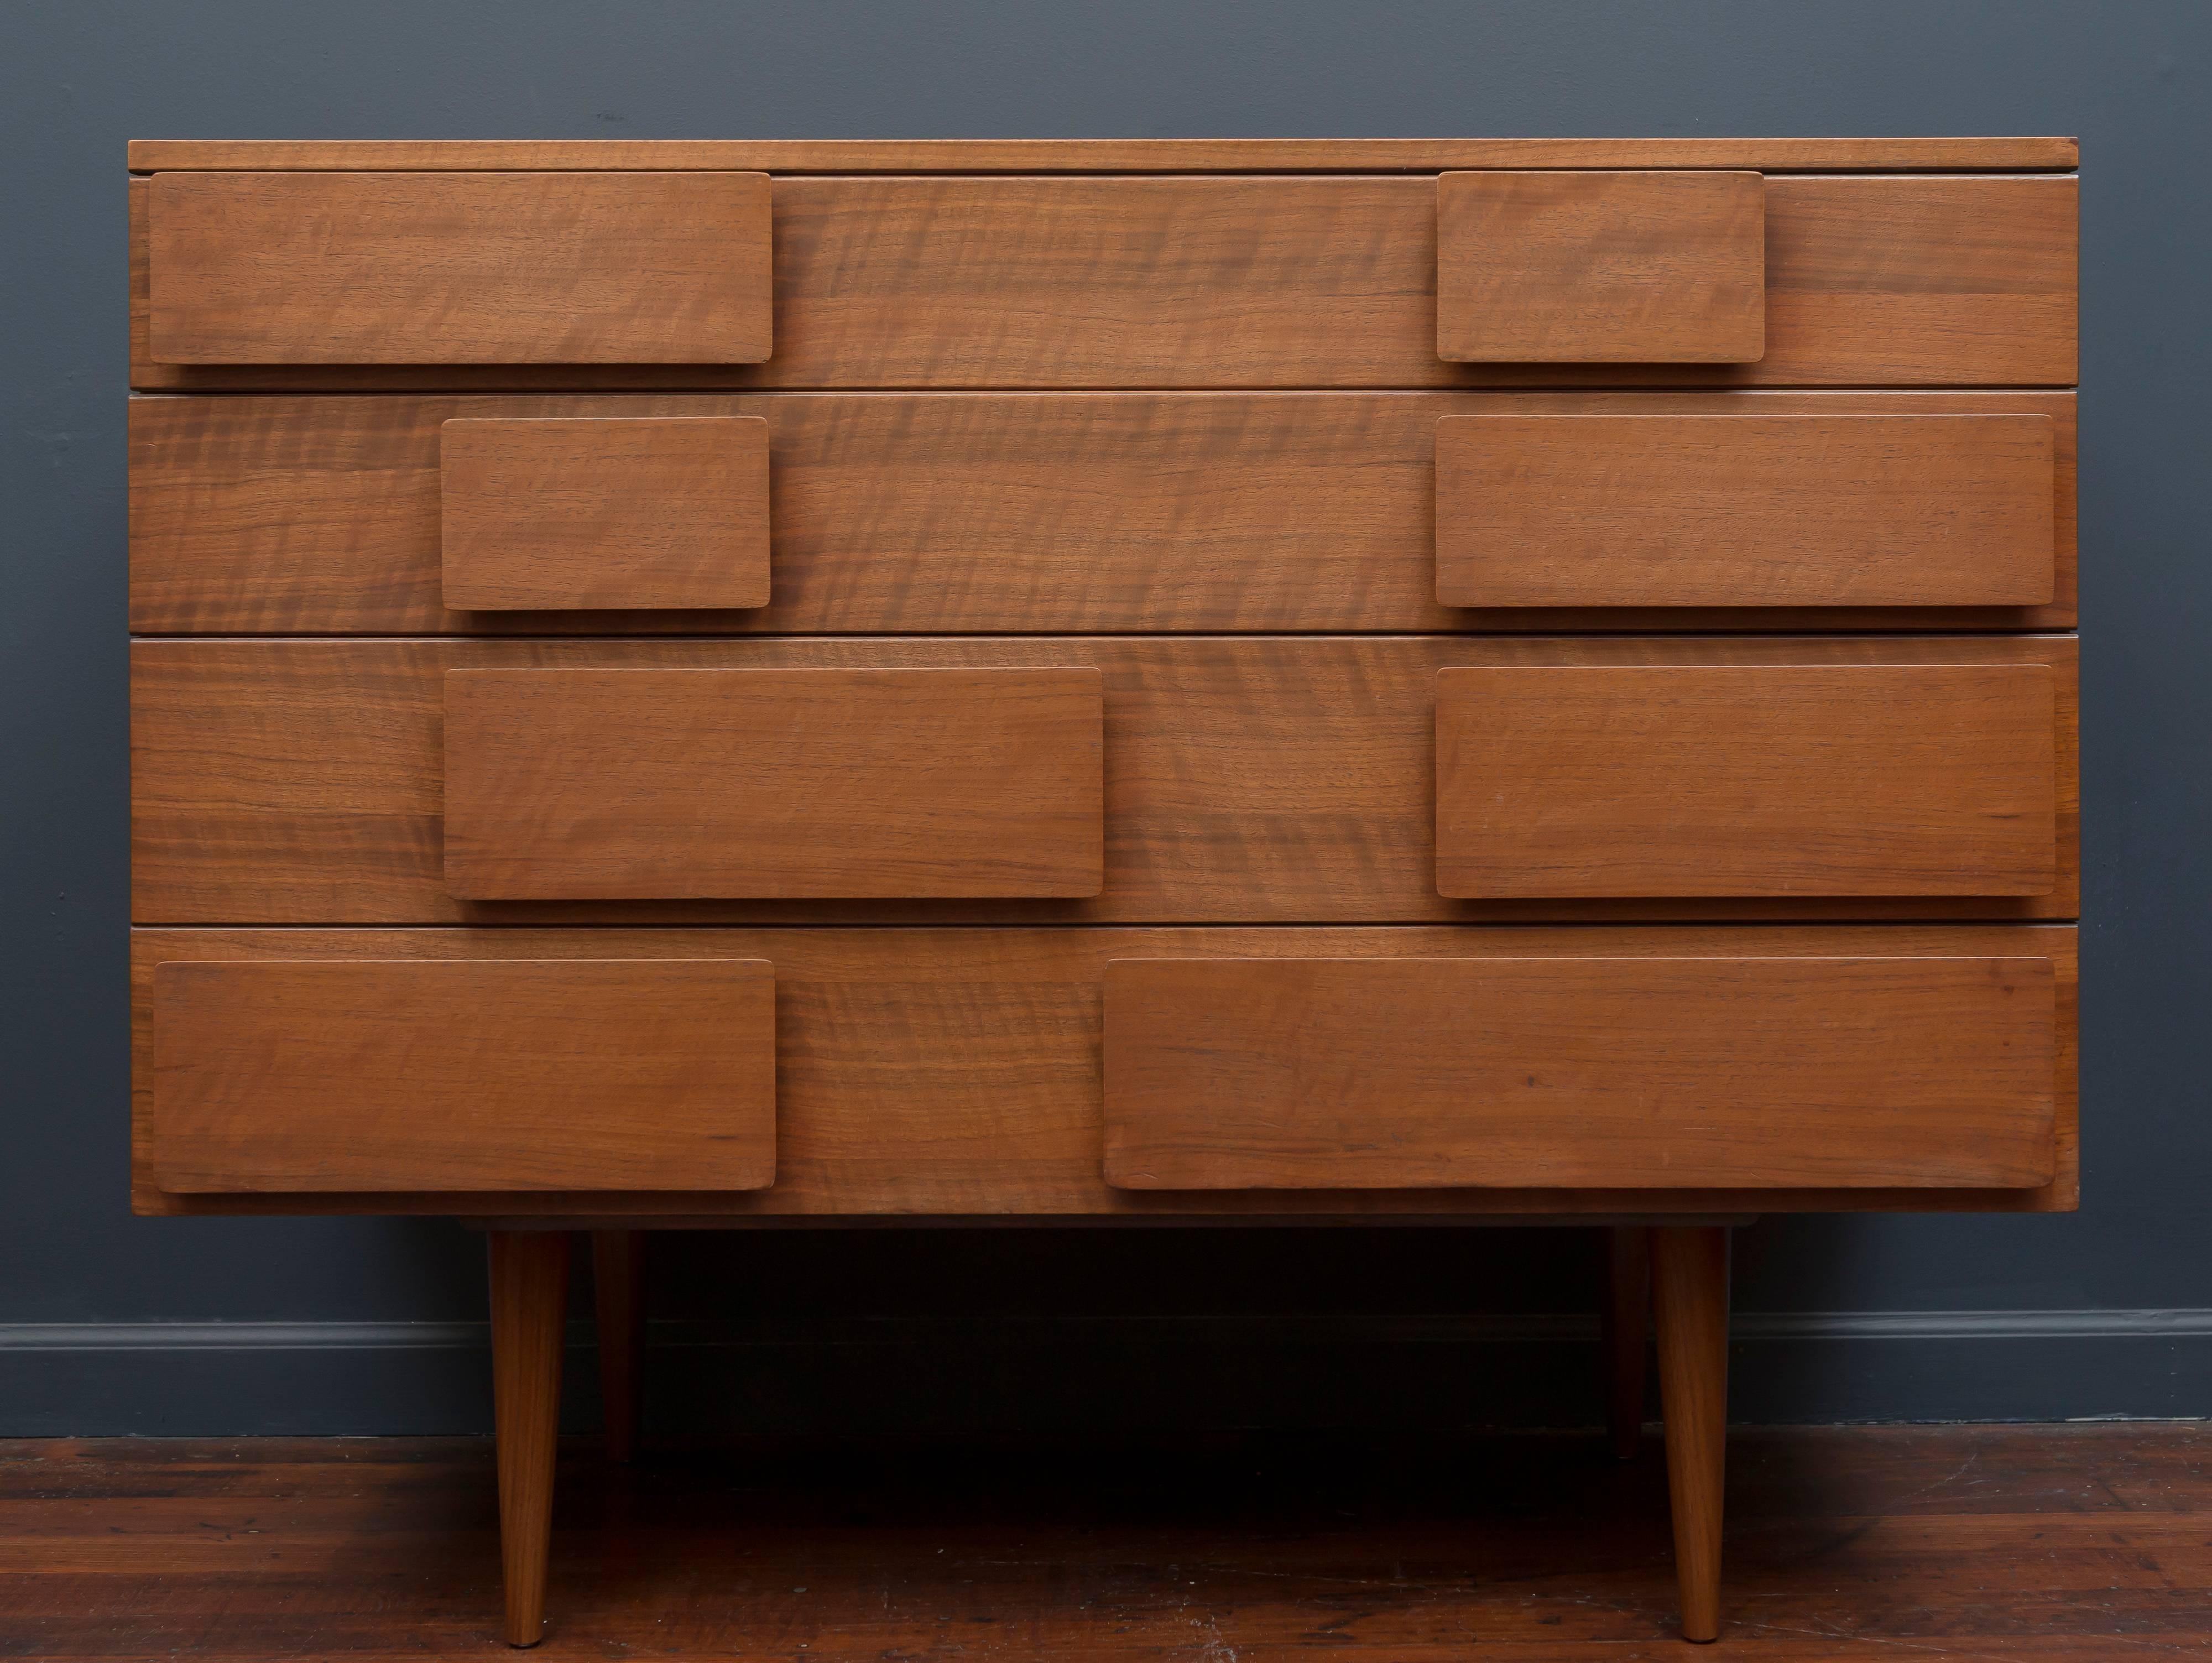 Gio Ponti design four-drawer walnut commode for Singer & Sons, Italy. The legs had been reduced in height so I had them professionally remade in the exact size and shape. The case and drawers are In very good original original condition with minor